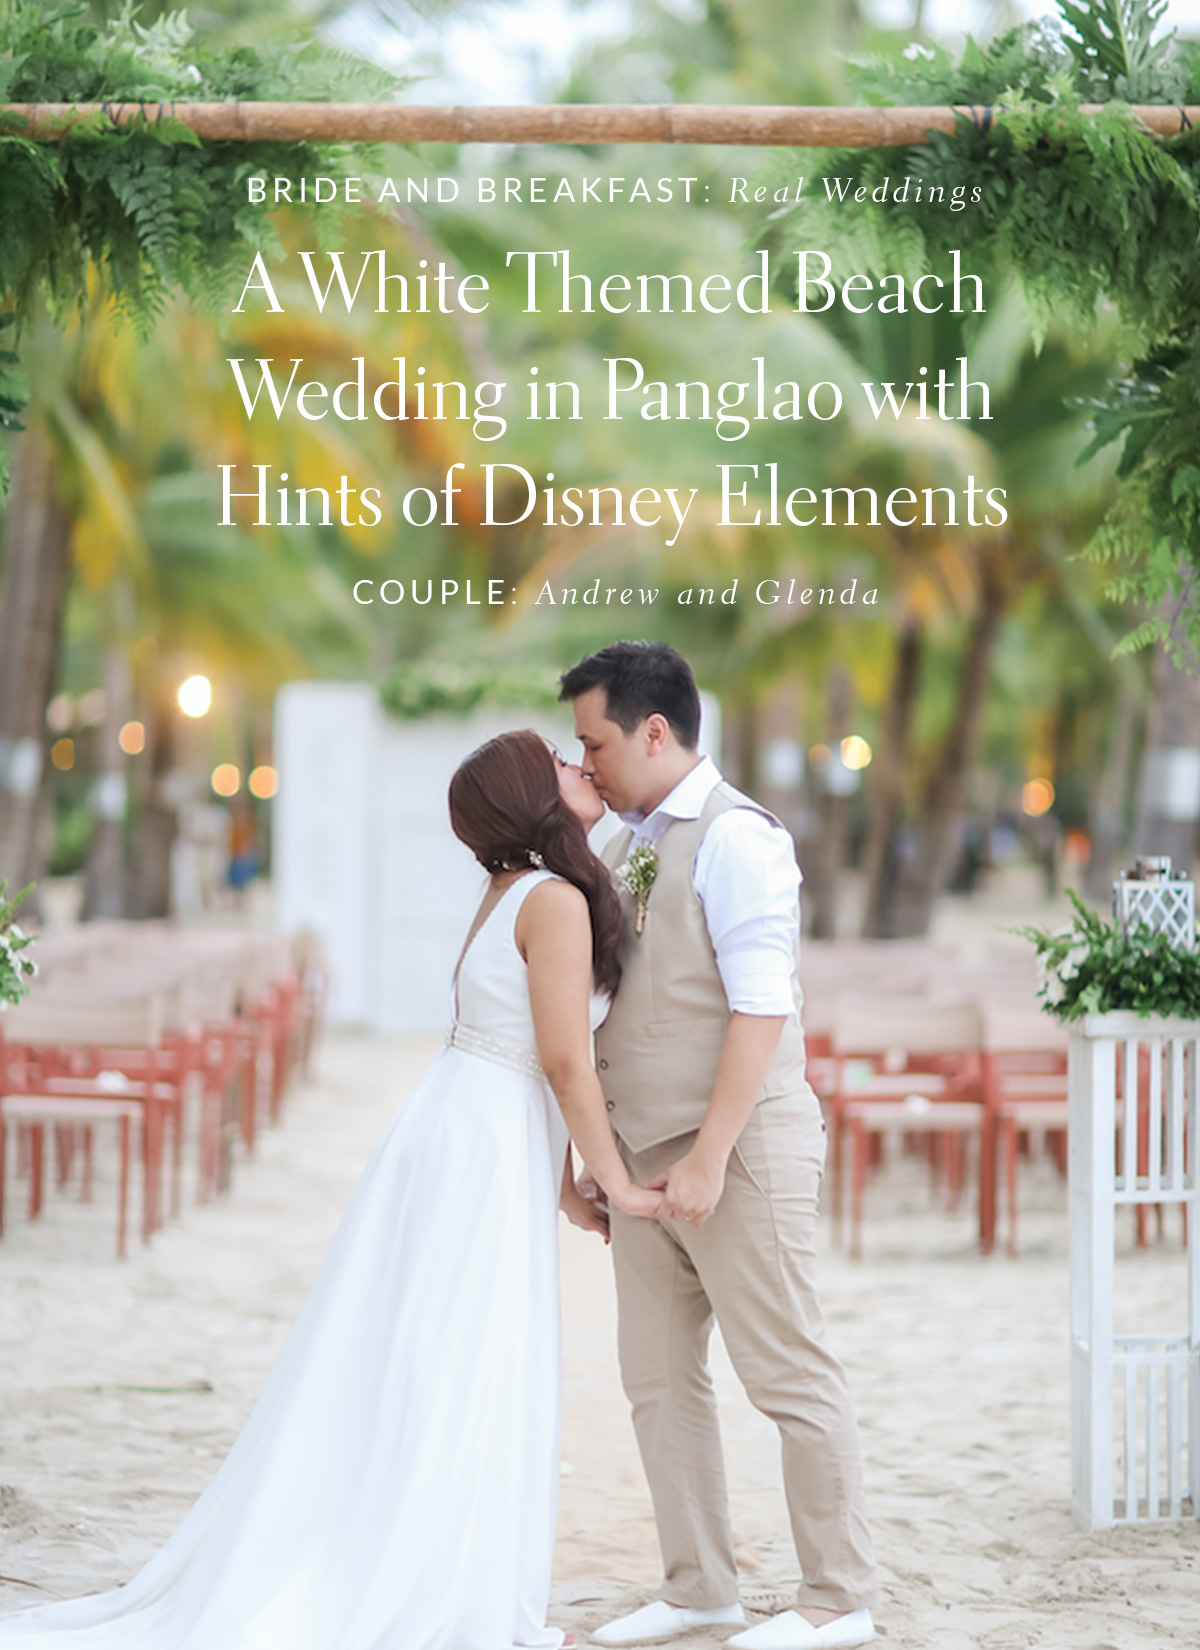 A White Themed Beach Wedding in Panglao with Hints of Disney Elements